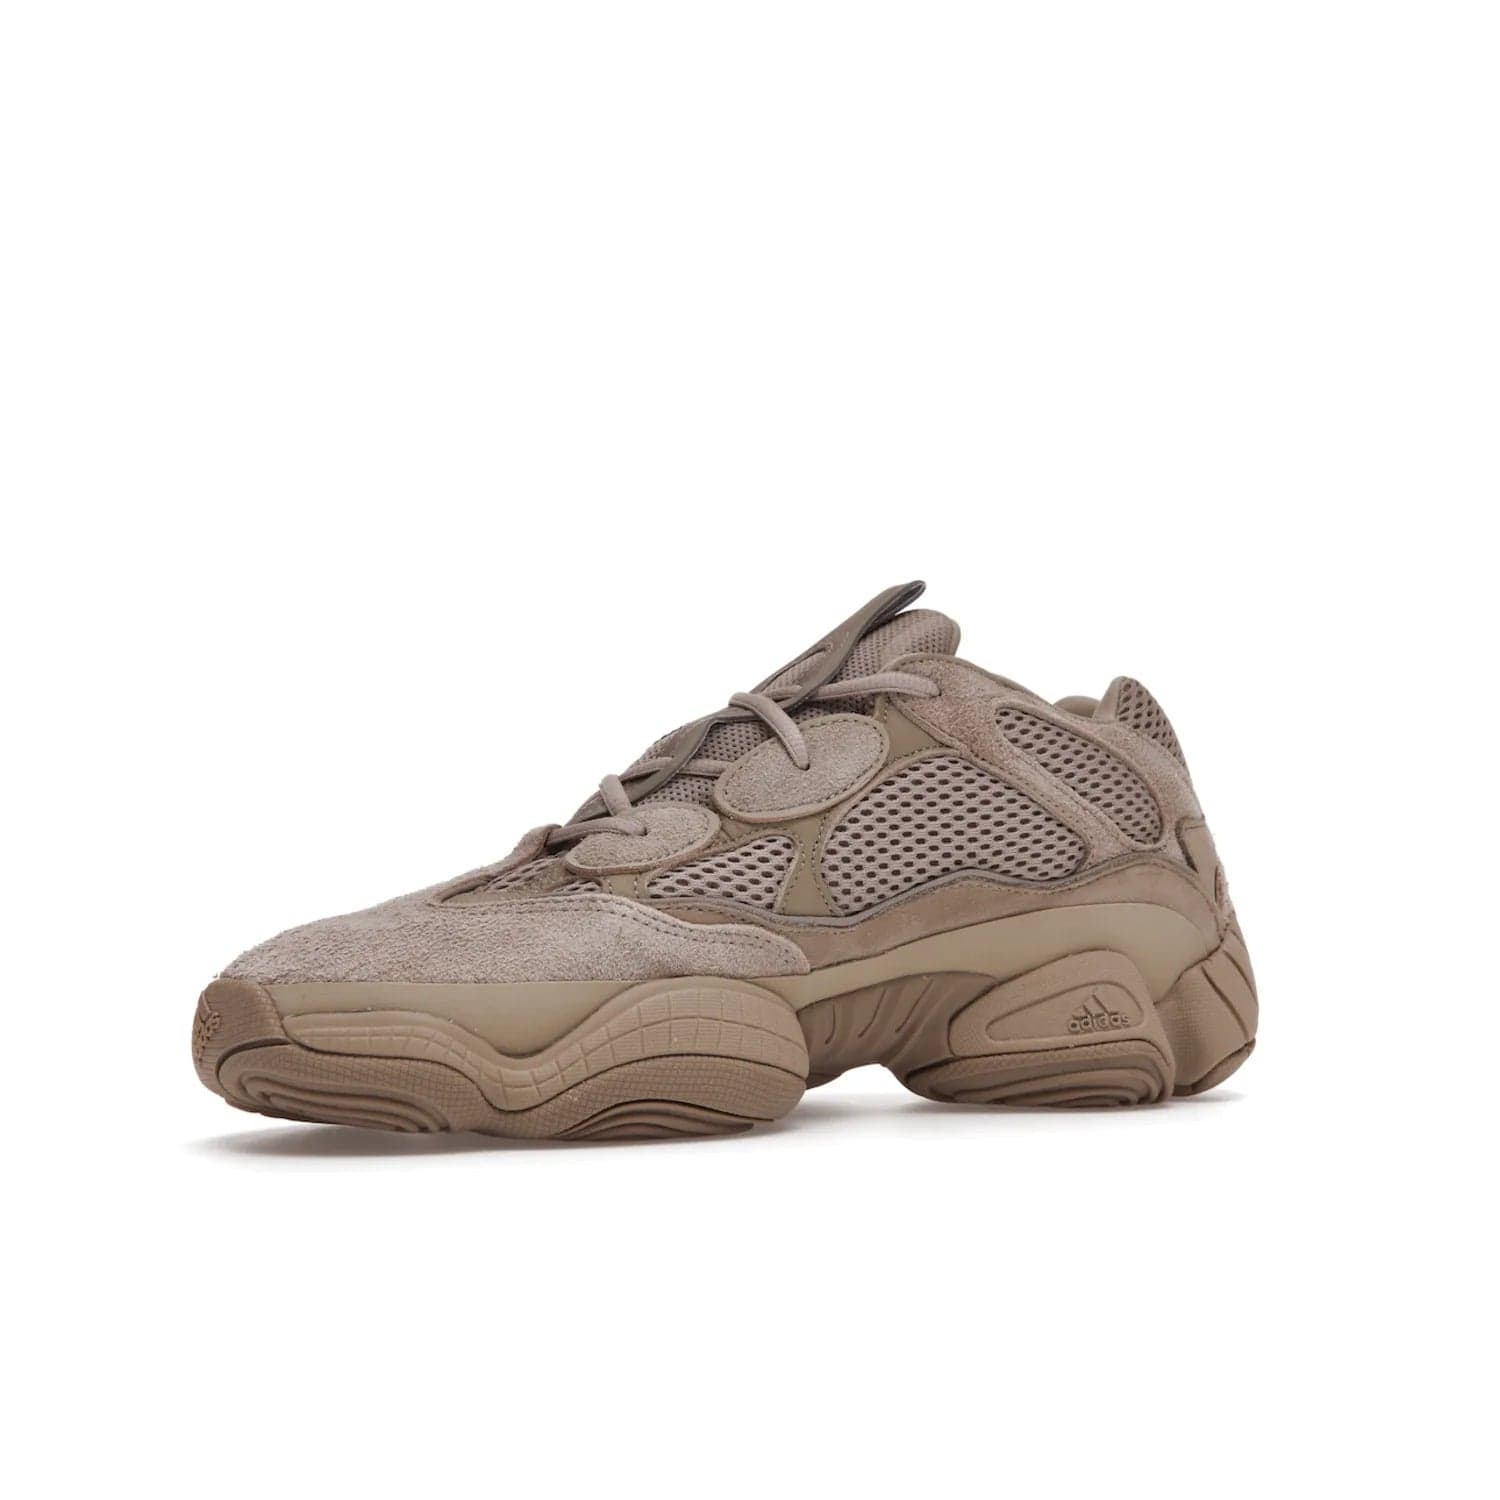 adidas Yeezy 500 Taupe Light - Image 16 - Only at www.BallersClubKickz.com - The adidas Yeezy 500 Taupe Light combines mesh, leather, and suede, with a durable adiPRENE sole for an eye-catching accessory. Reflective piping adds the perfect finishing touches to this unique silhouette. Ideal for any wardrobe, releasing in June 2021.